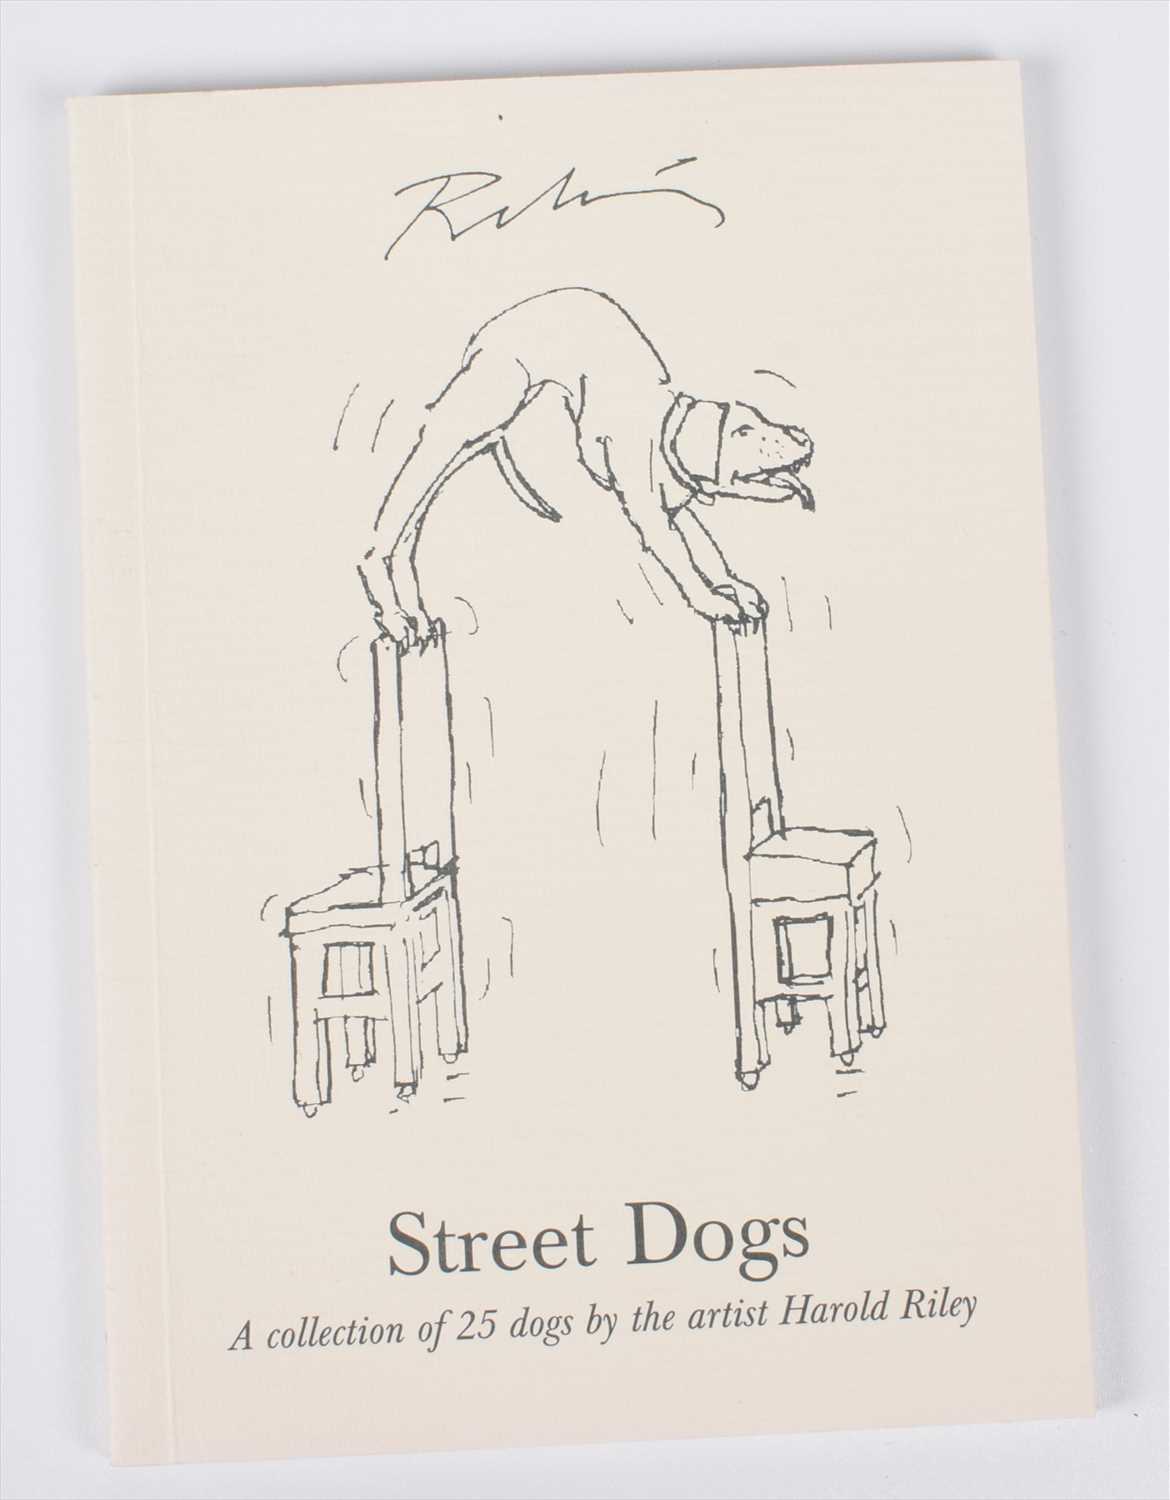 137 - Signed edition of "Street Dogs" by Harold Riley, with original dog drawing.